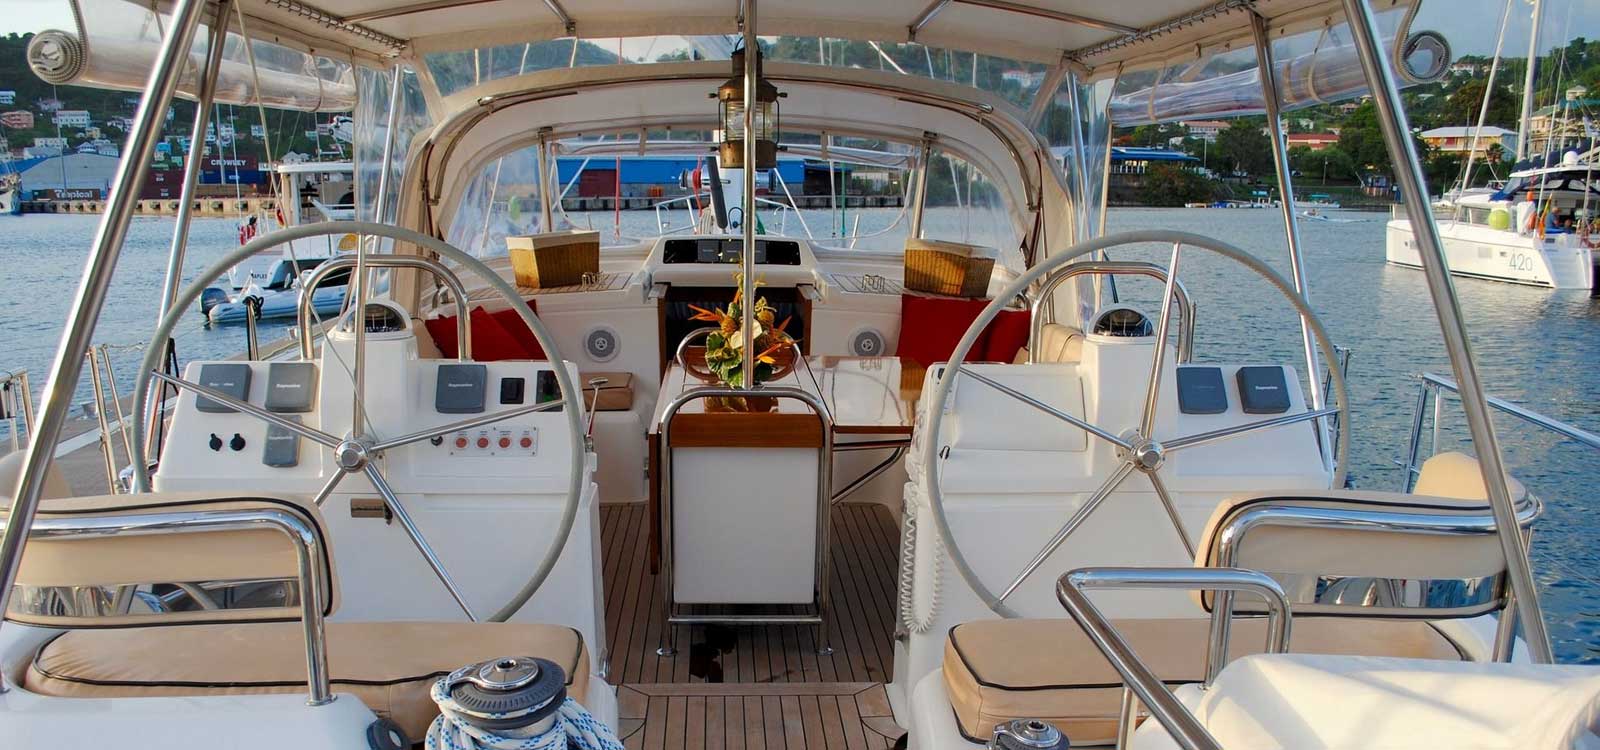 Yachts for sale in the UK